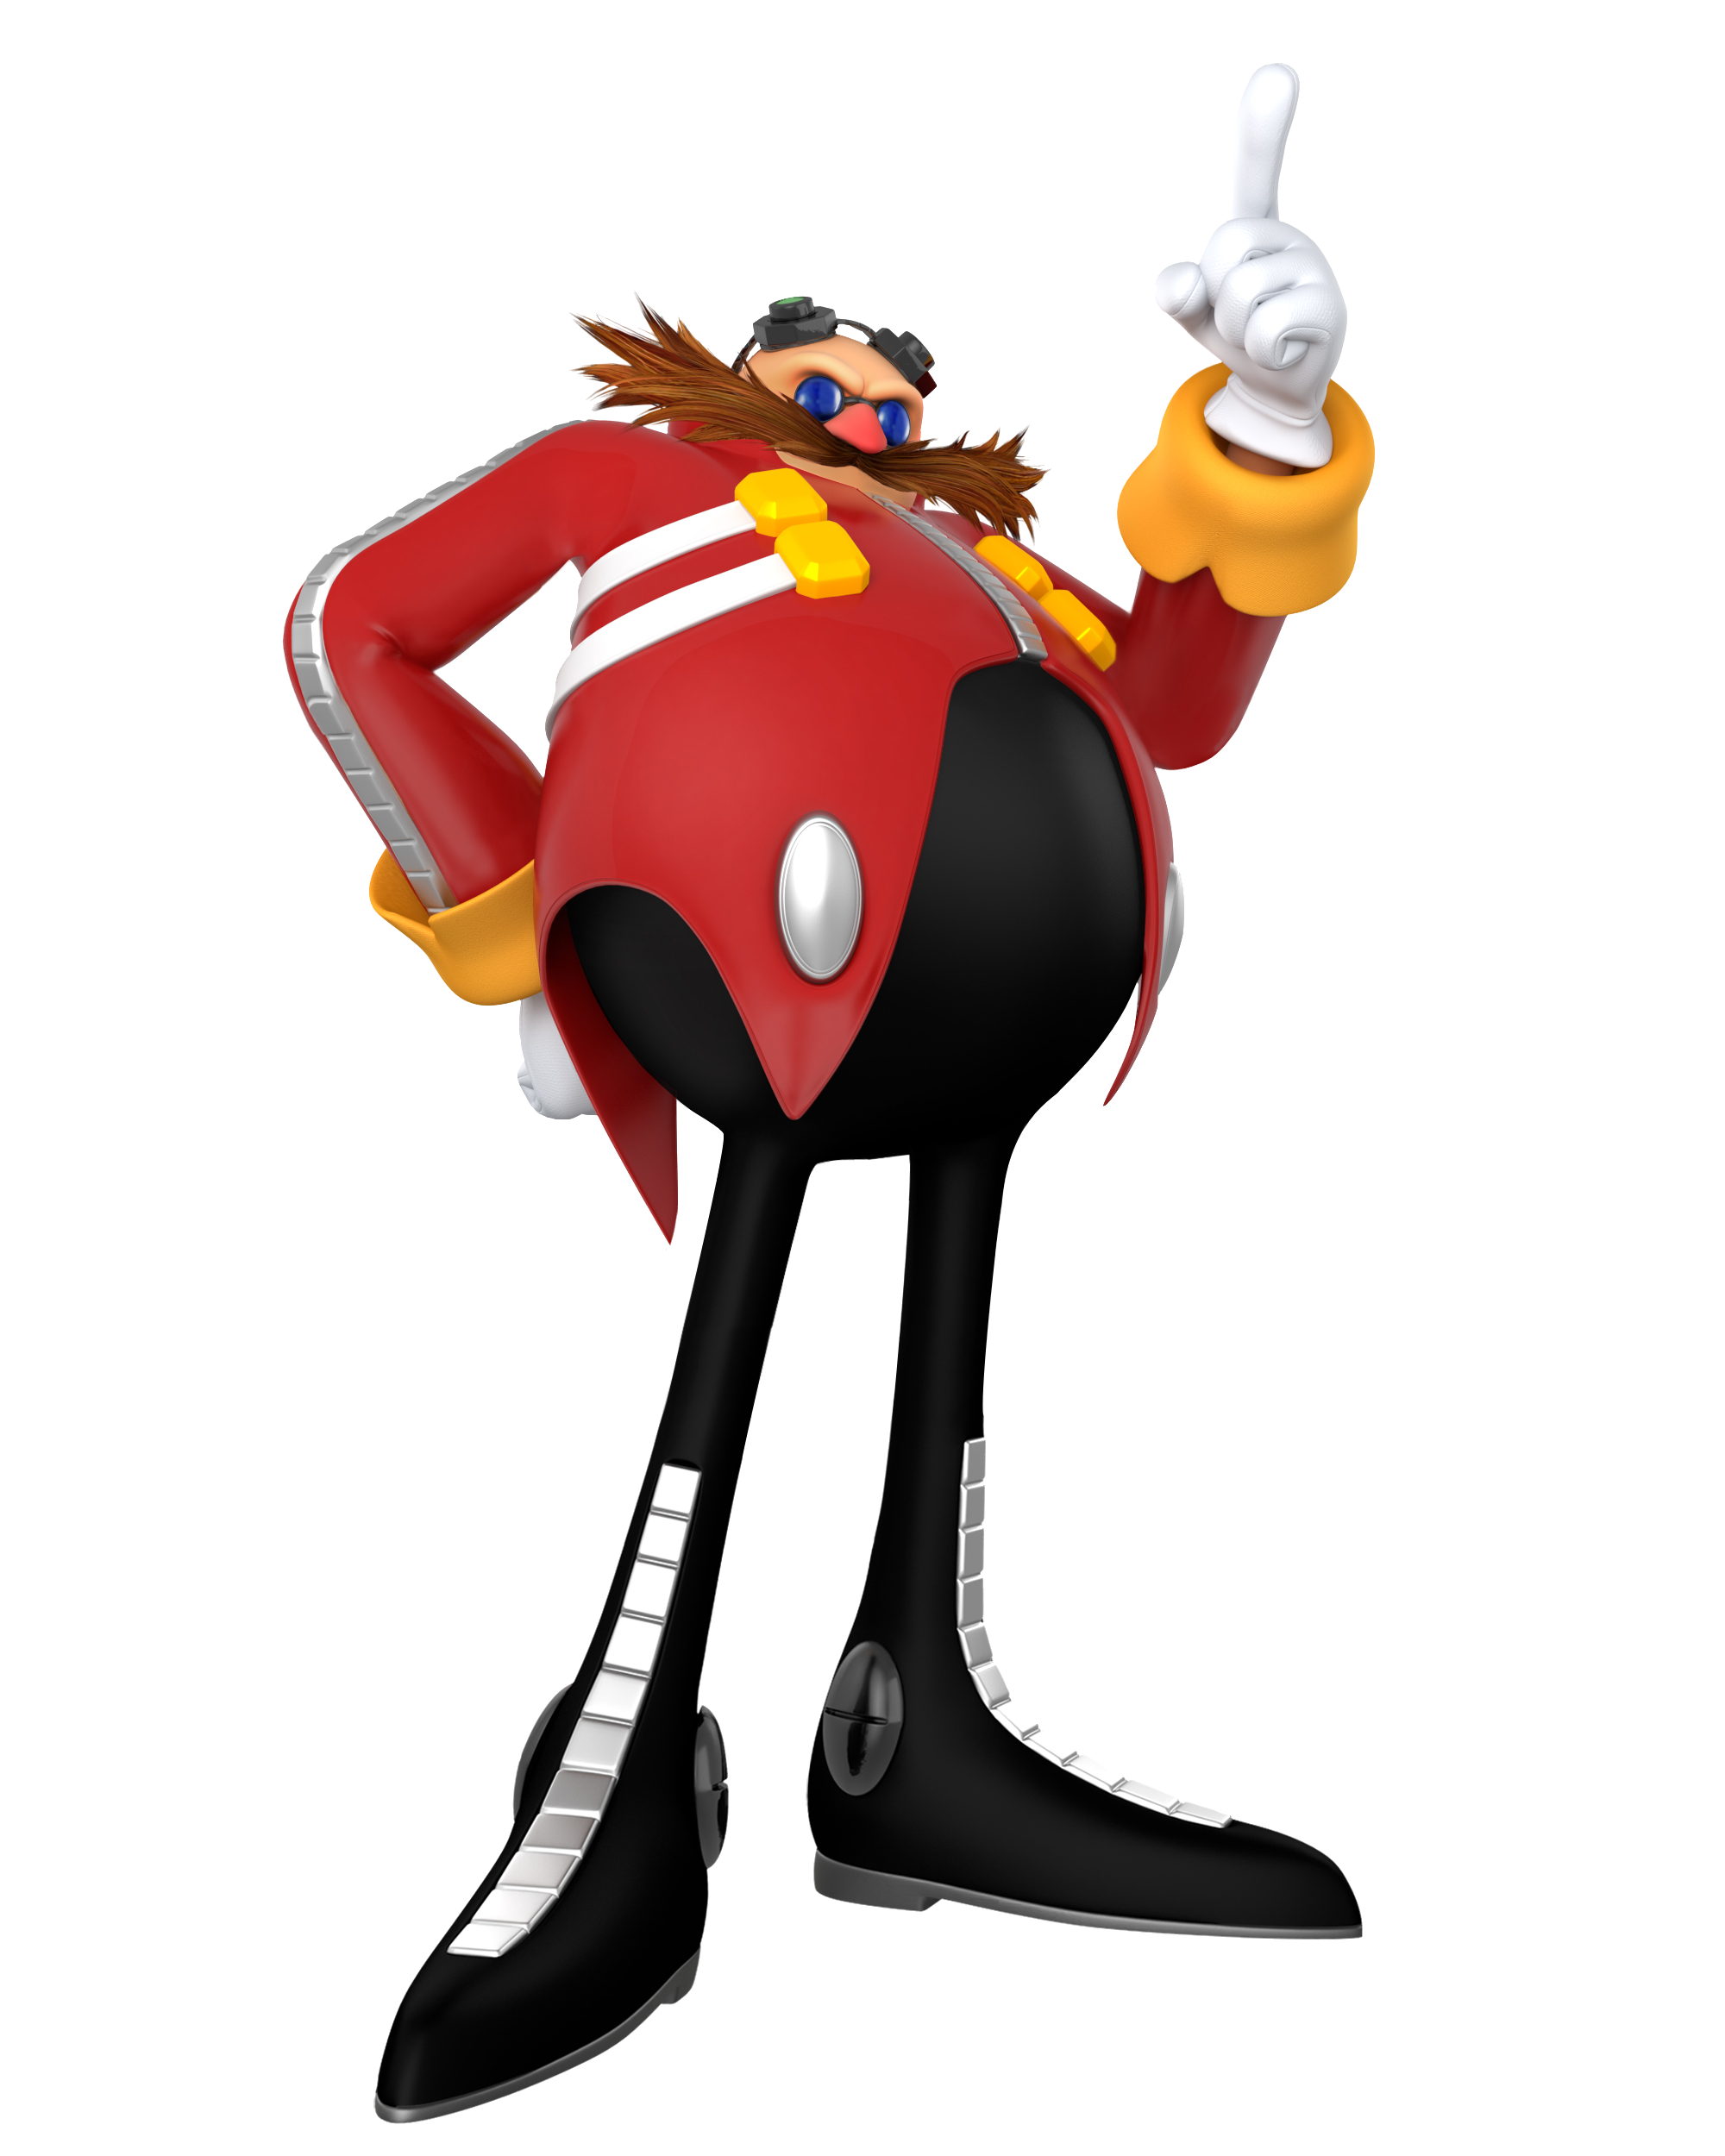 Image Dr Eggman Png Pooh S Adventures Wiki Fandom Powered By Wikia